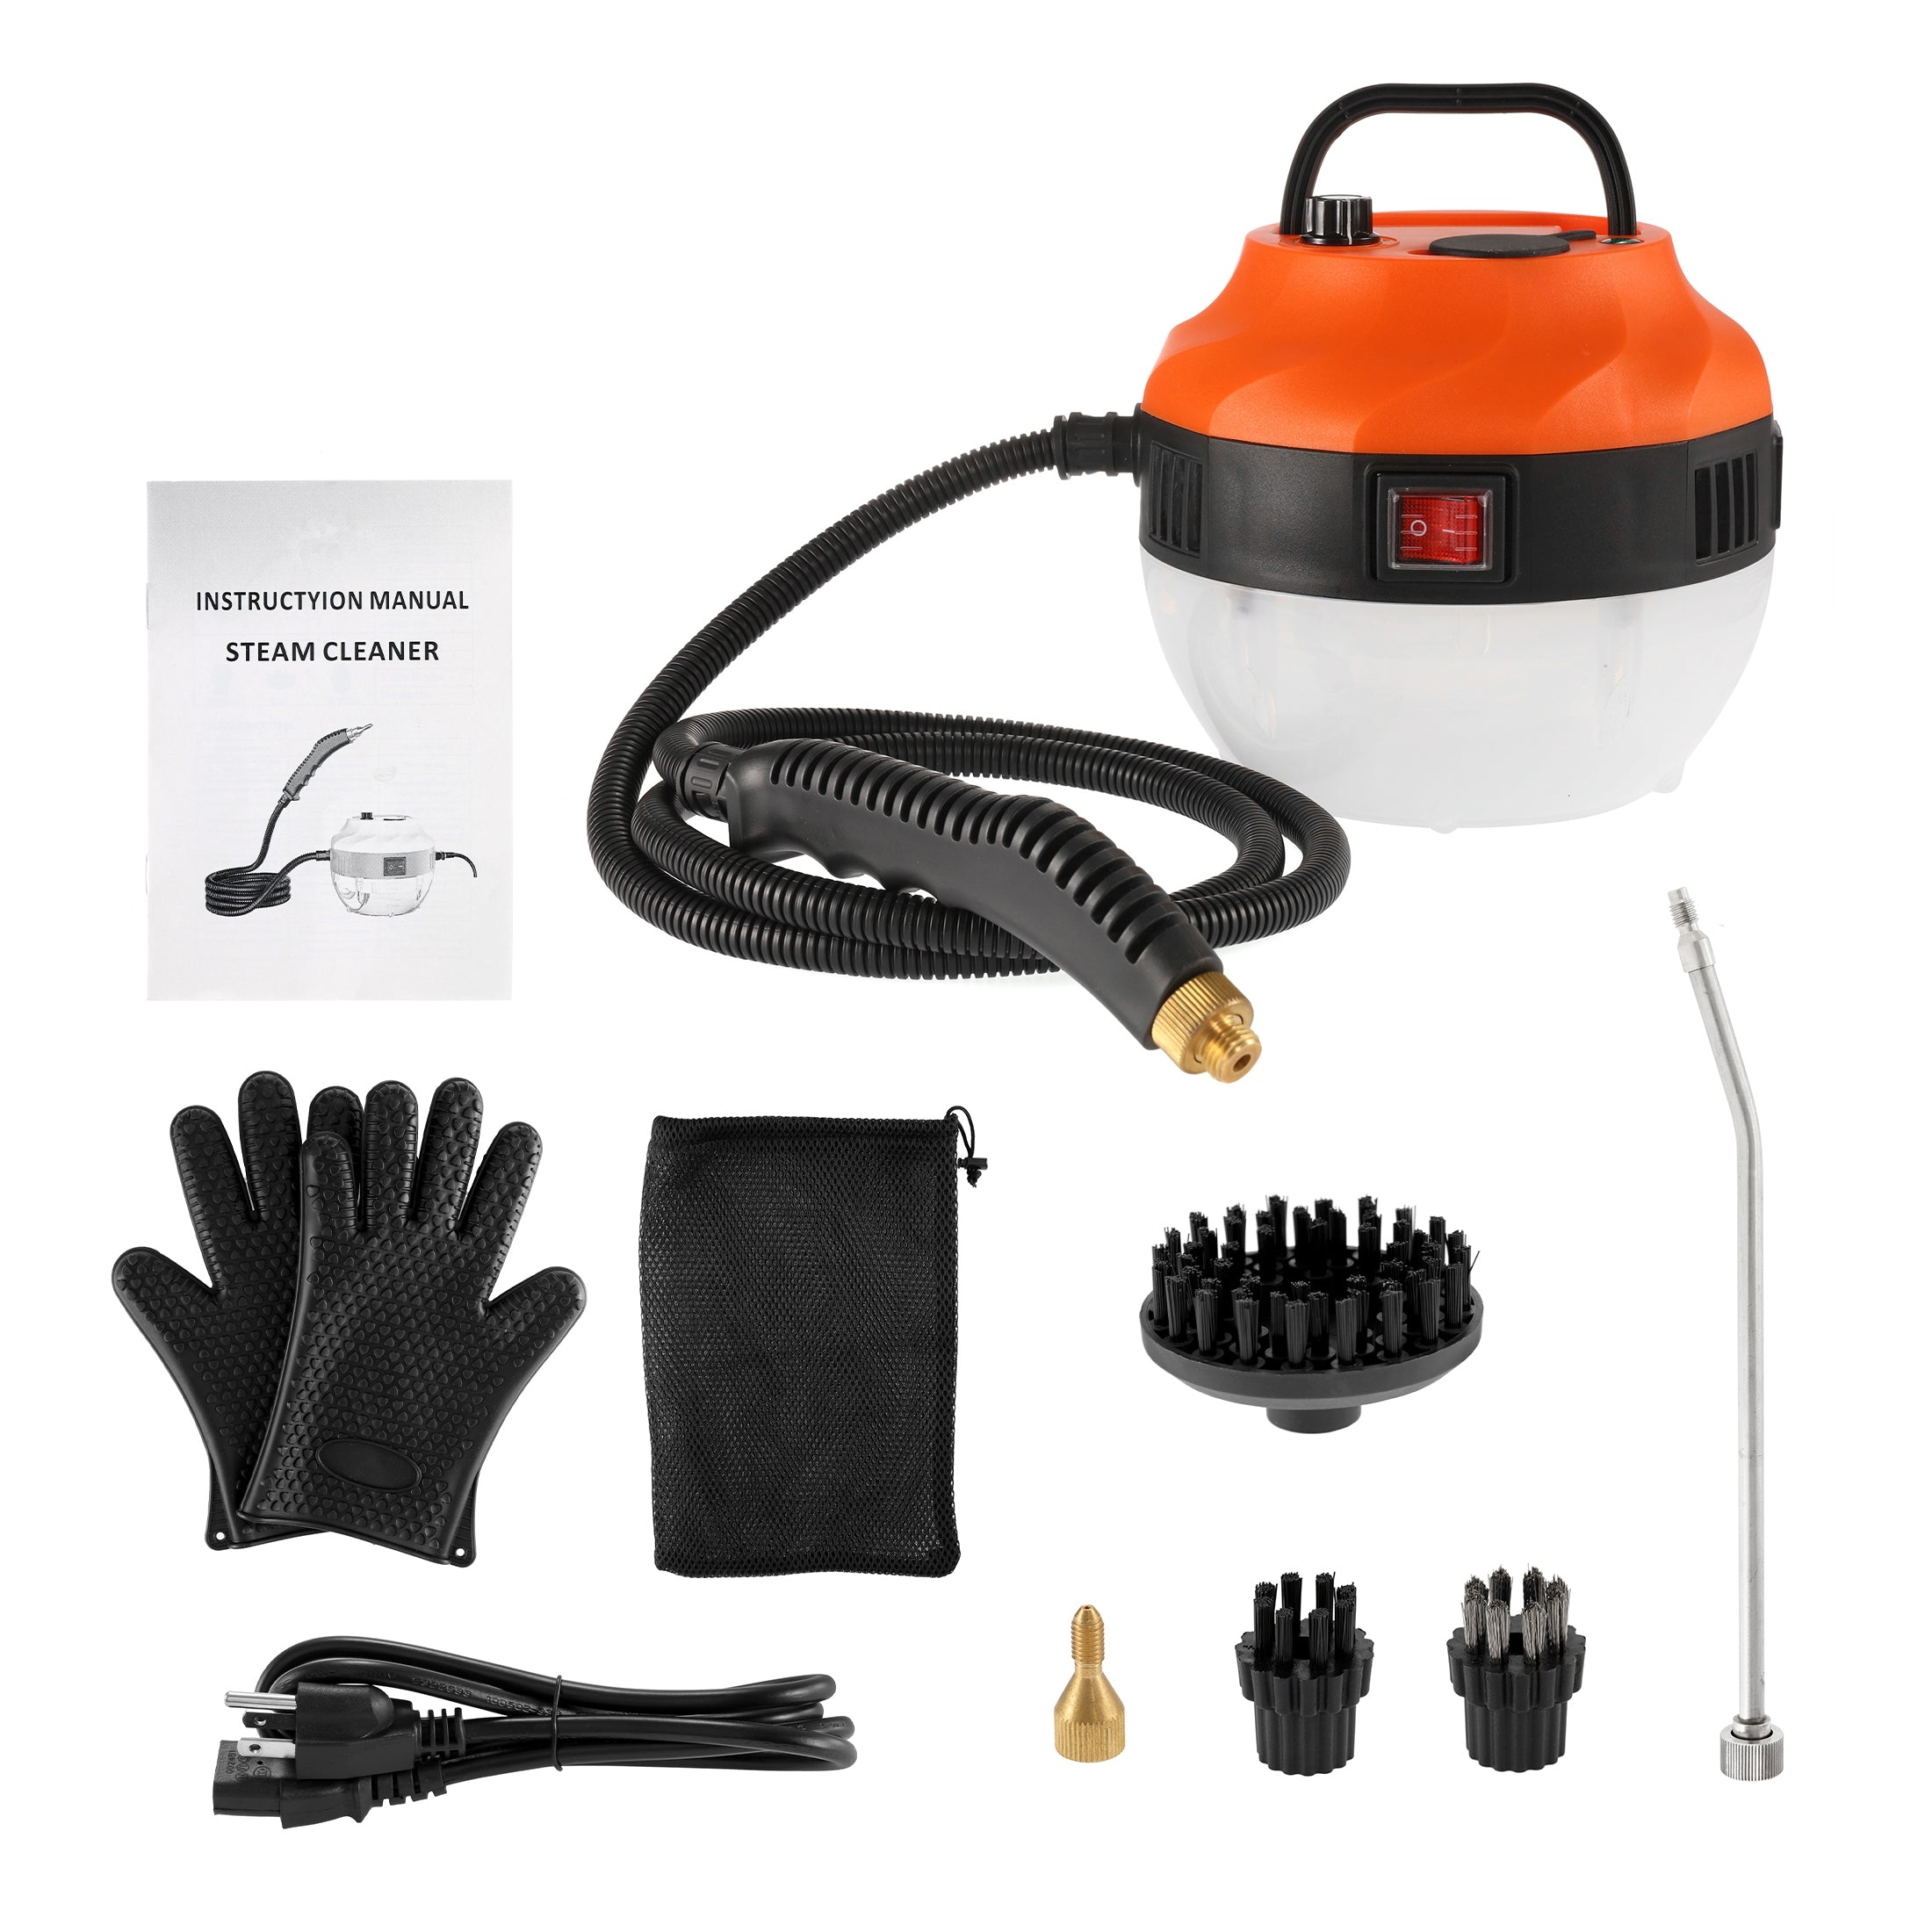 Steam Cleaner for Home Car Detailing Steamer Cleaning Handheld Steam Machine